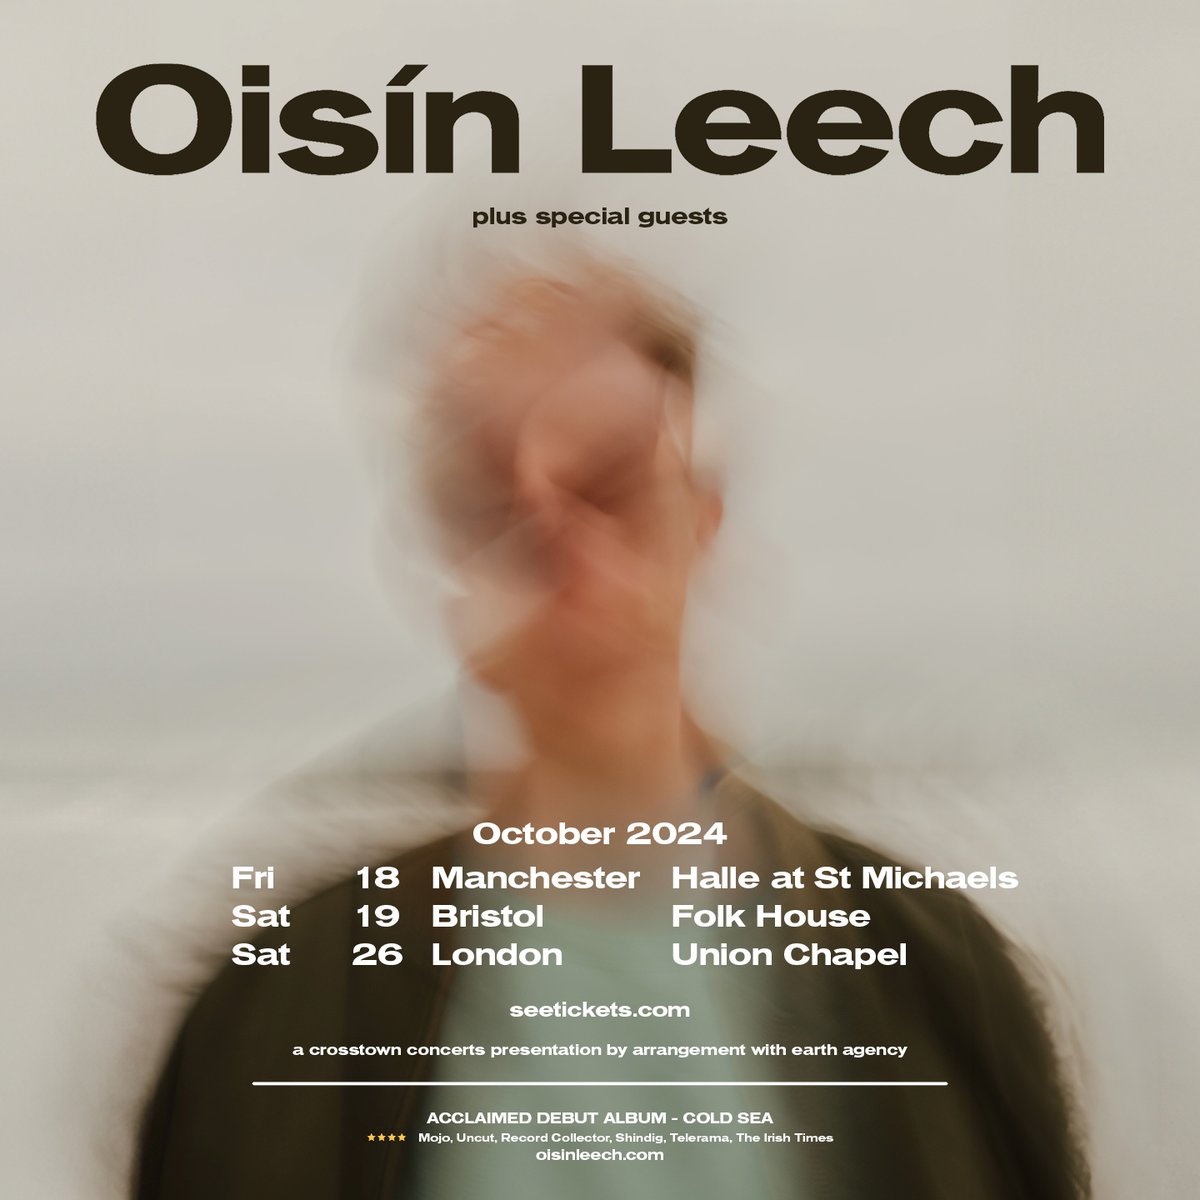 Tickets are on sale now for @OisinLeechMusic , shows this October at Halle at St Michaels, Folk House Bristol and @UnionChapelUK . crosstownconcerts.seetickets.com/artist/oisin-l…